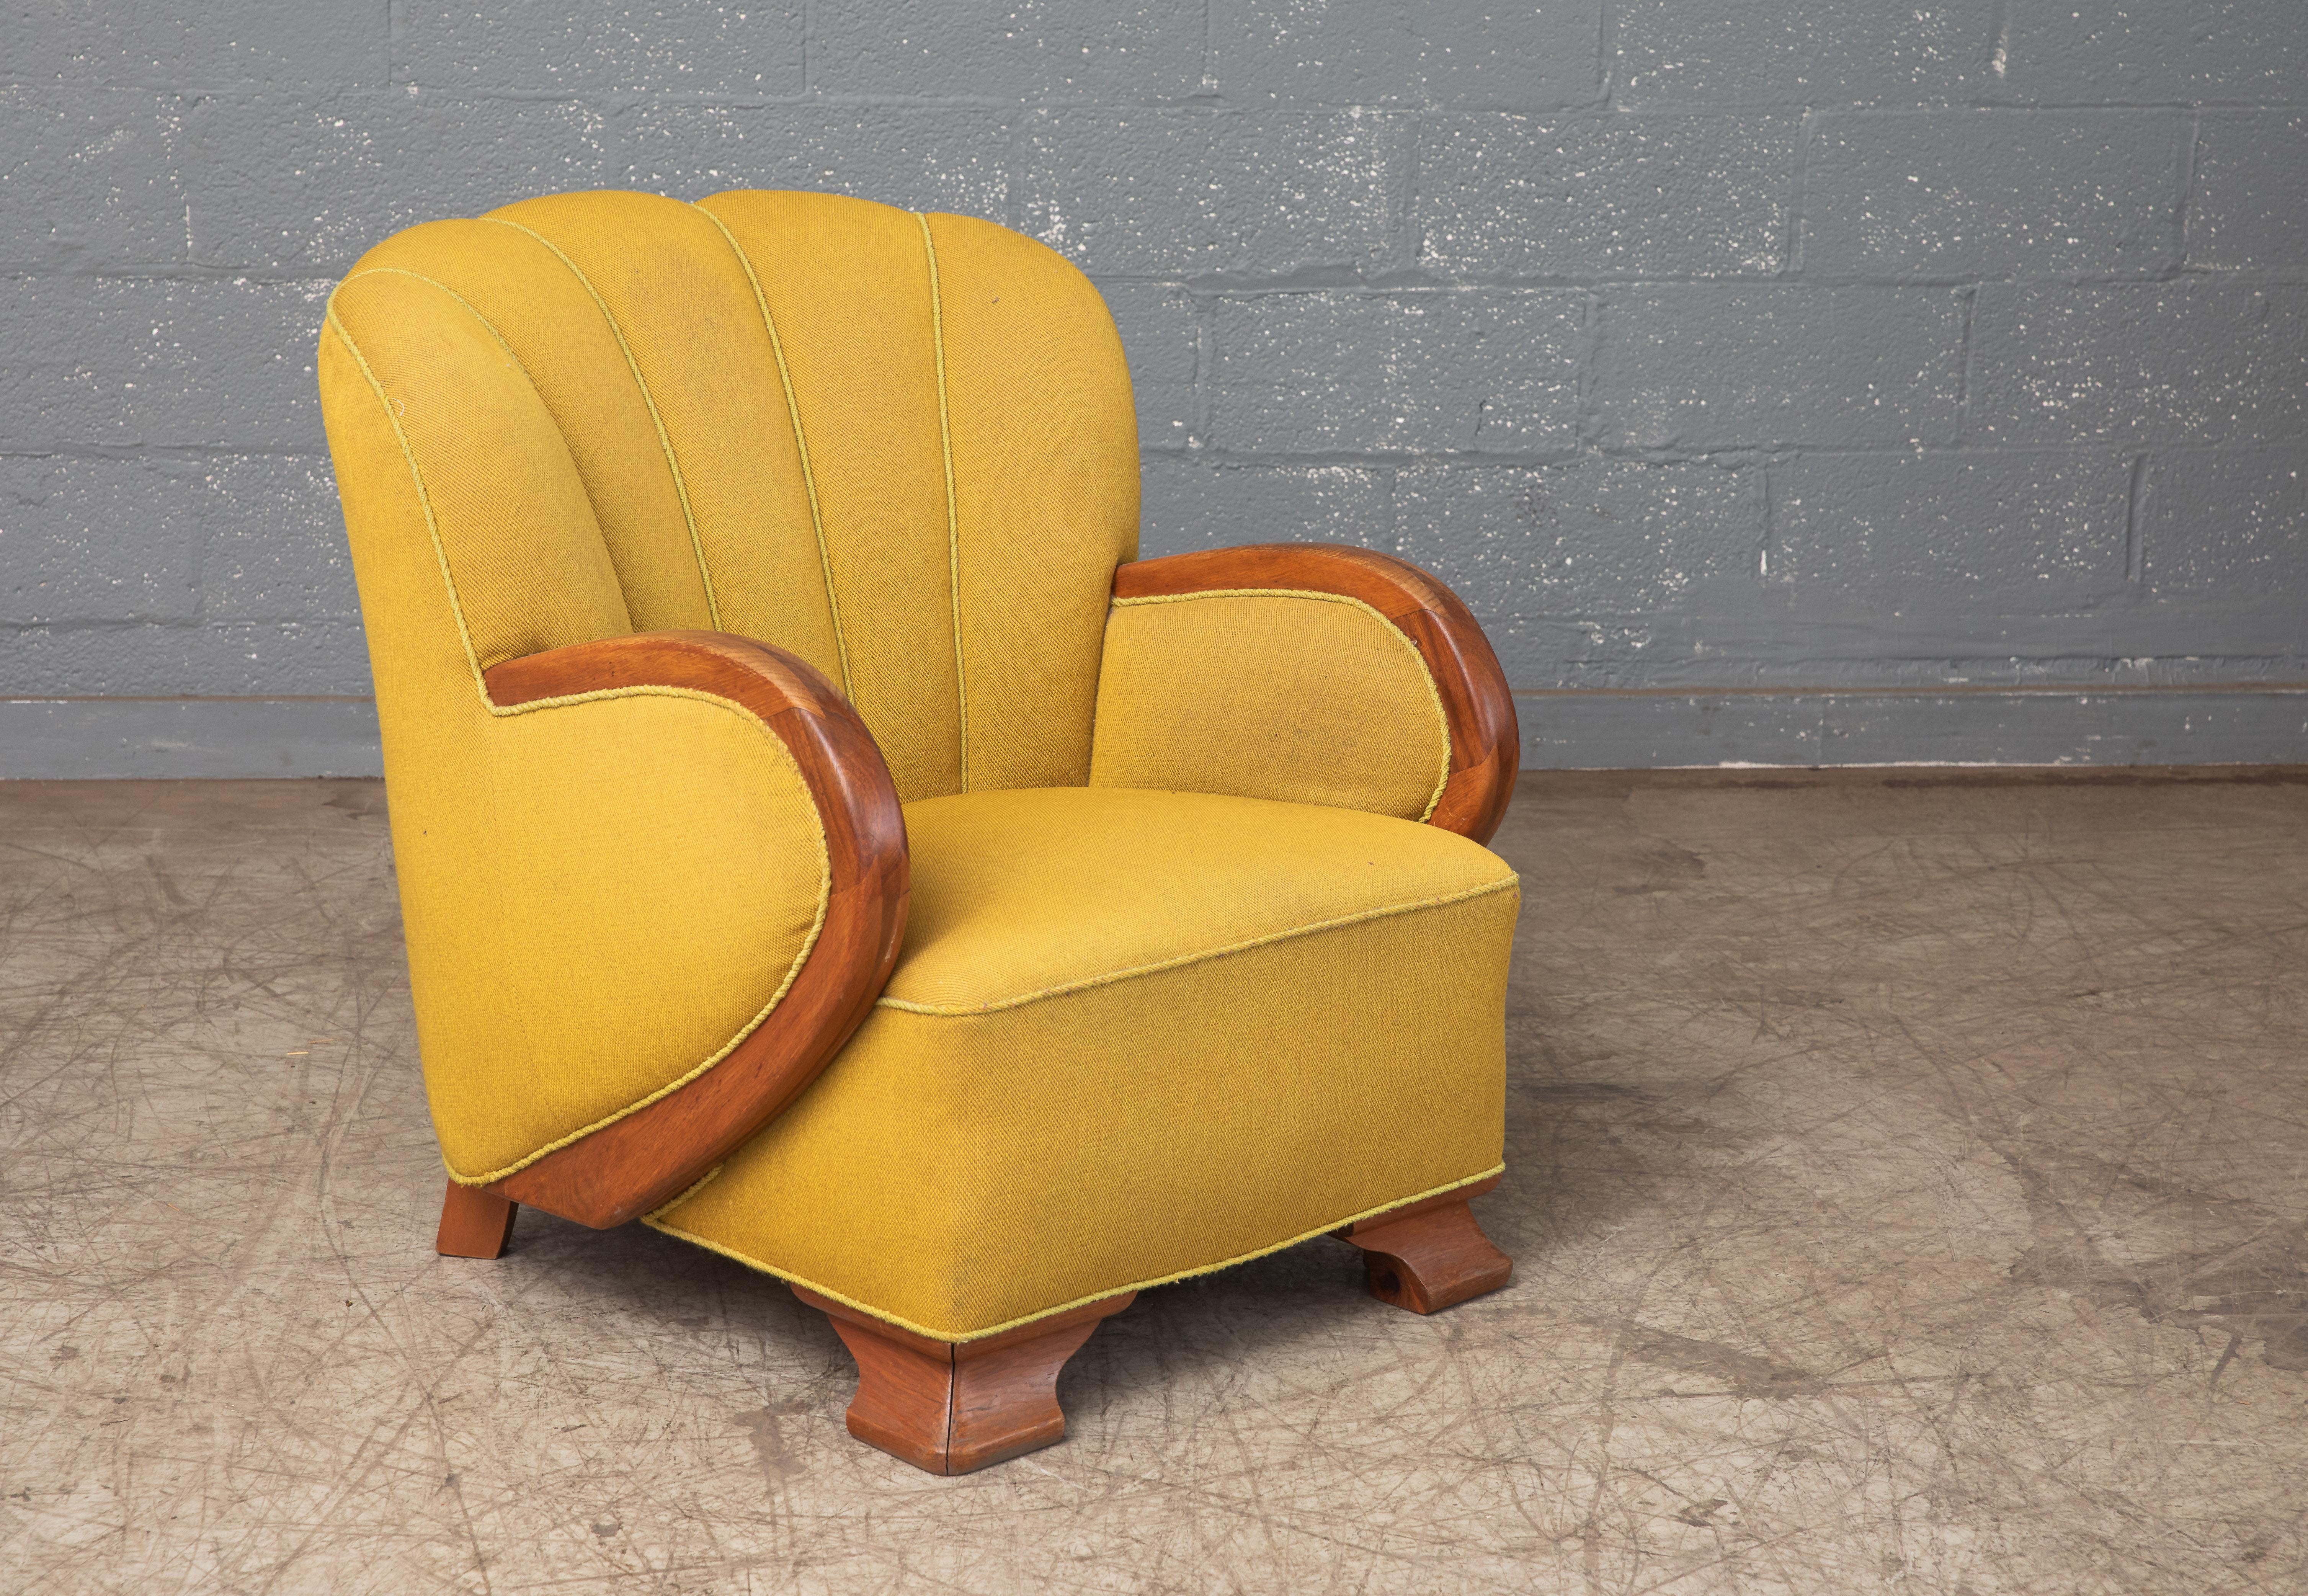 Mid-20th Century Mogens Lassen Style Danish Midcentury Lounge or Club Chair, 1940s For Sale